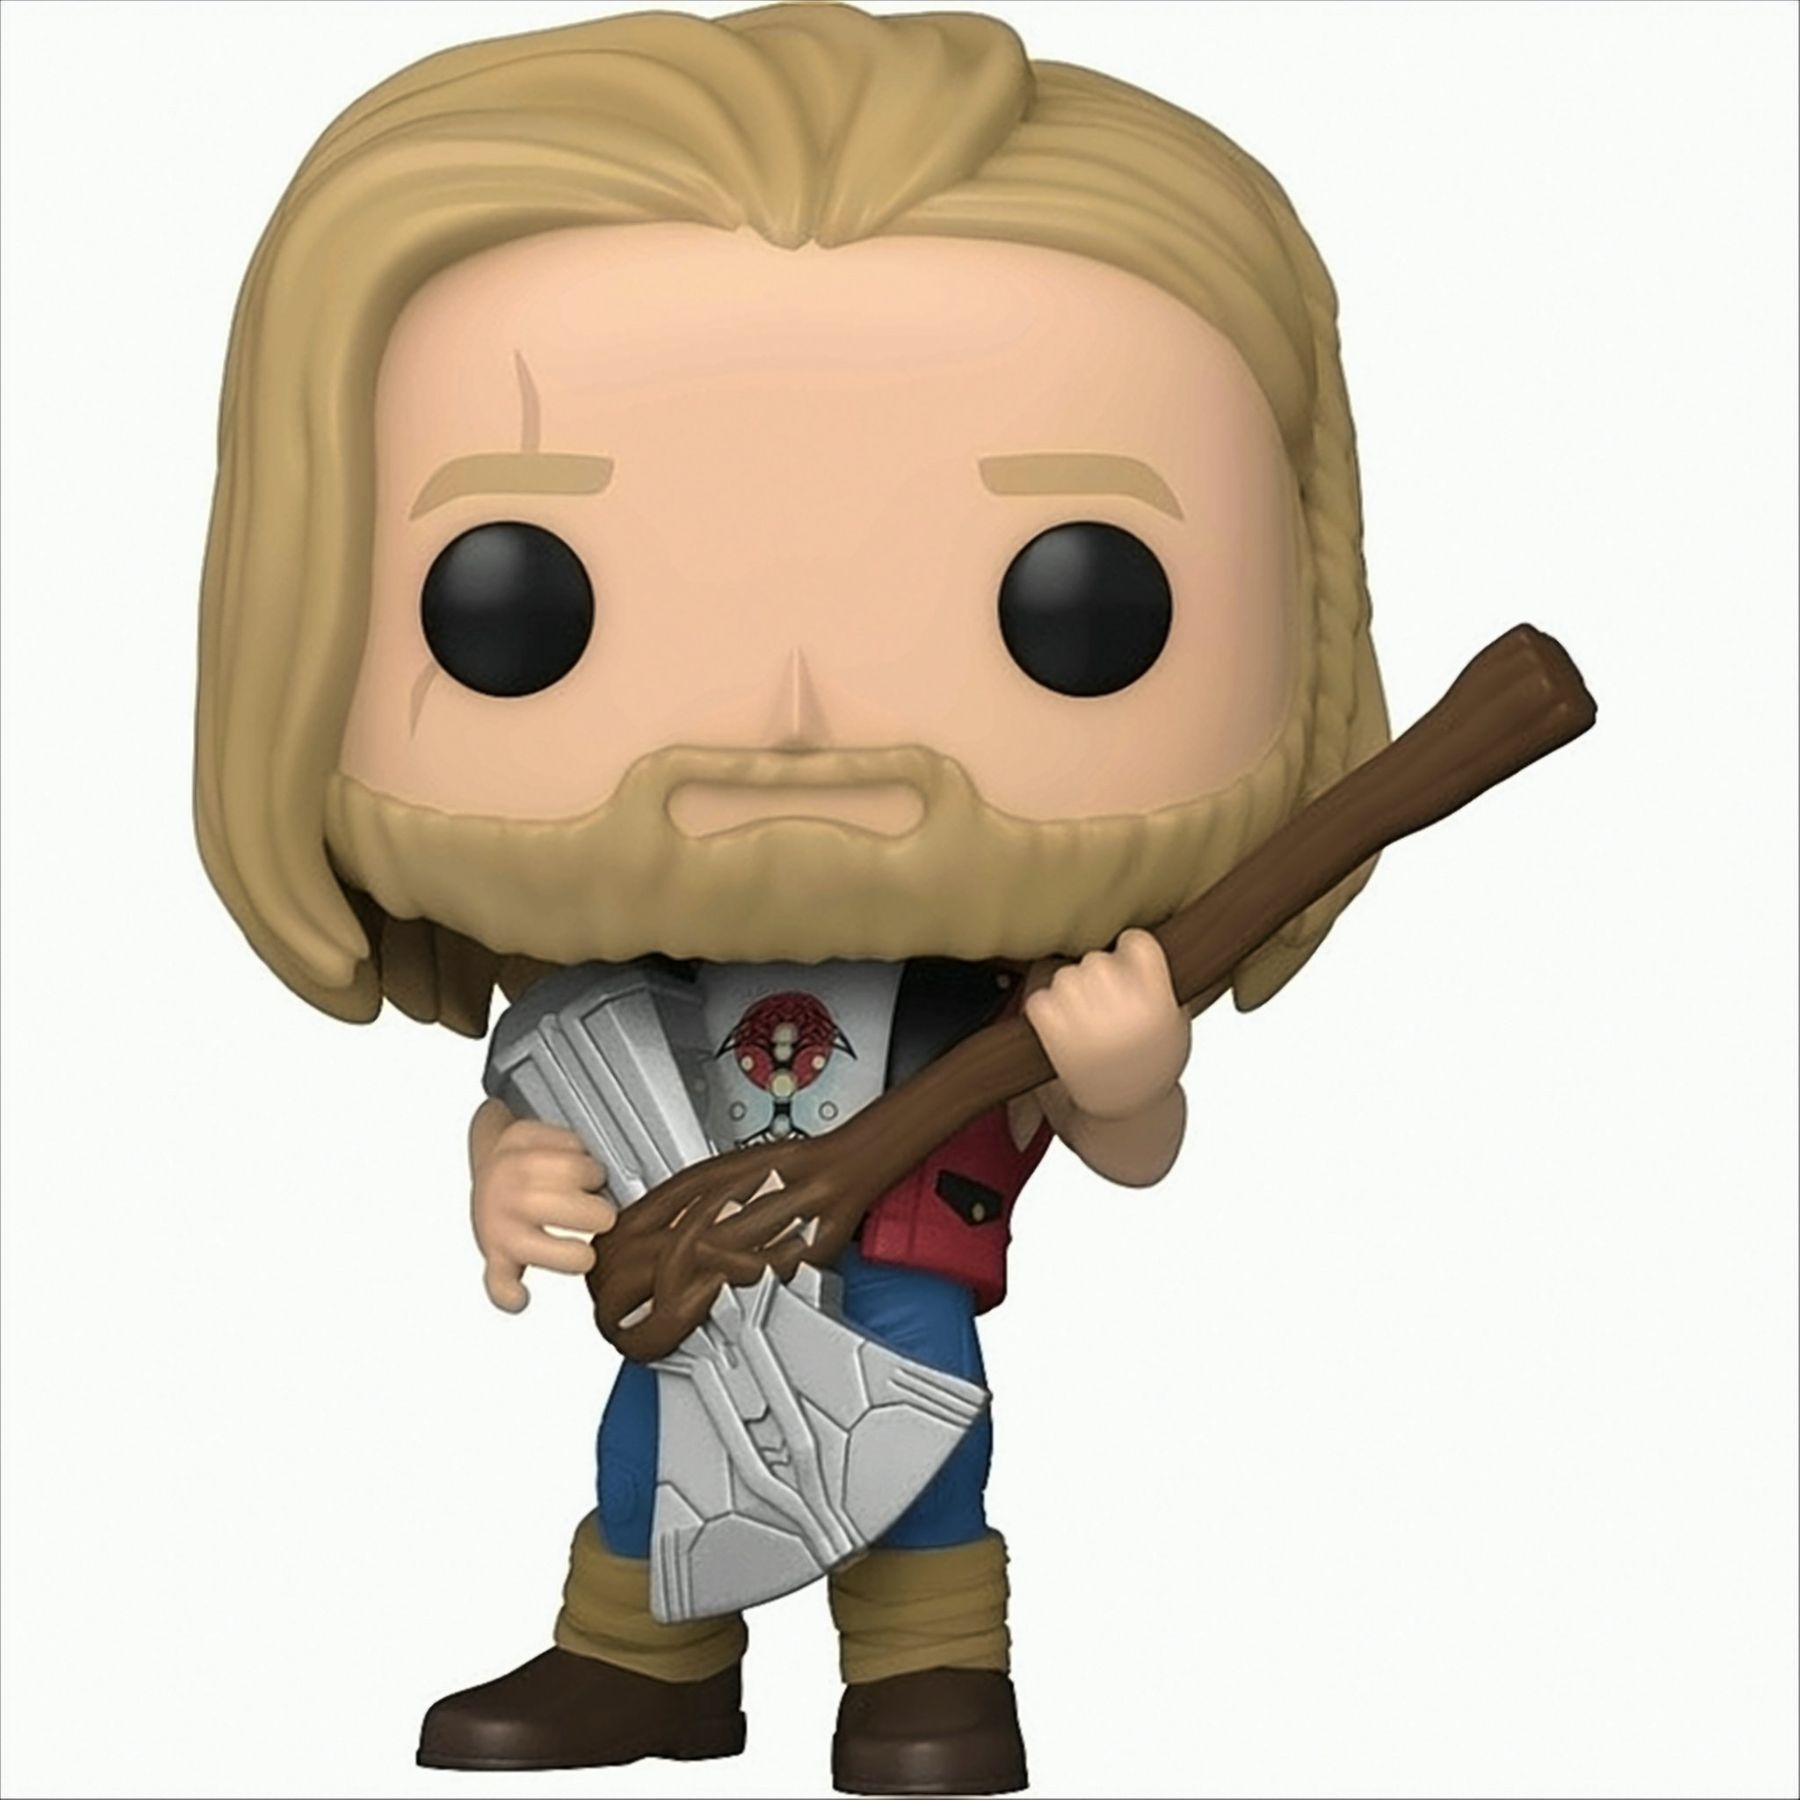 Thor Thor - POP Thunder Love and Ravager -